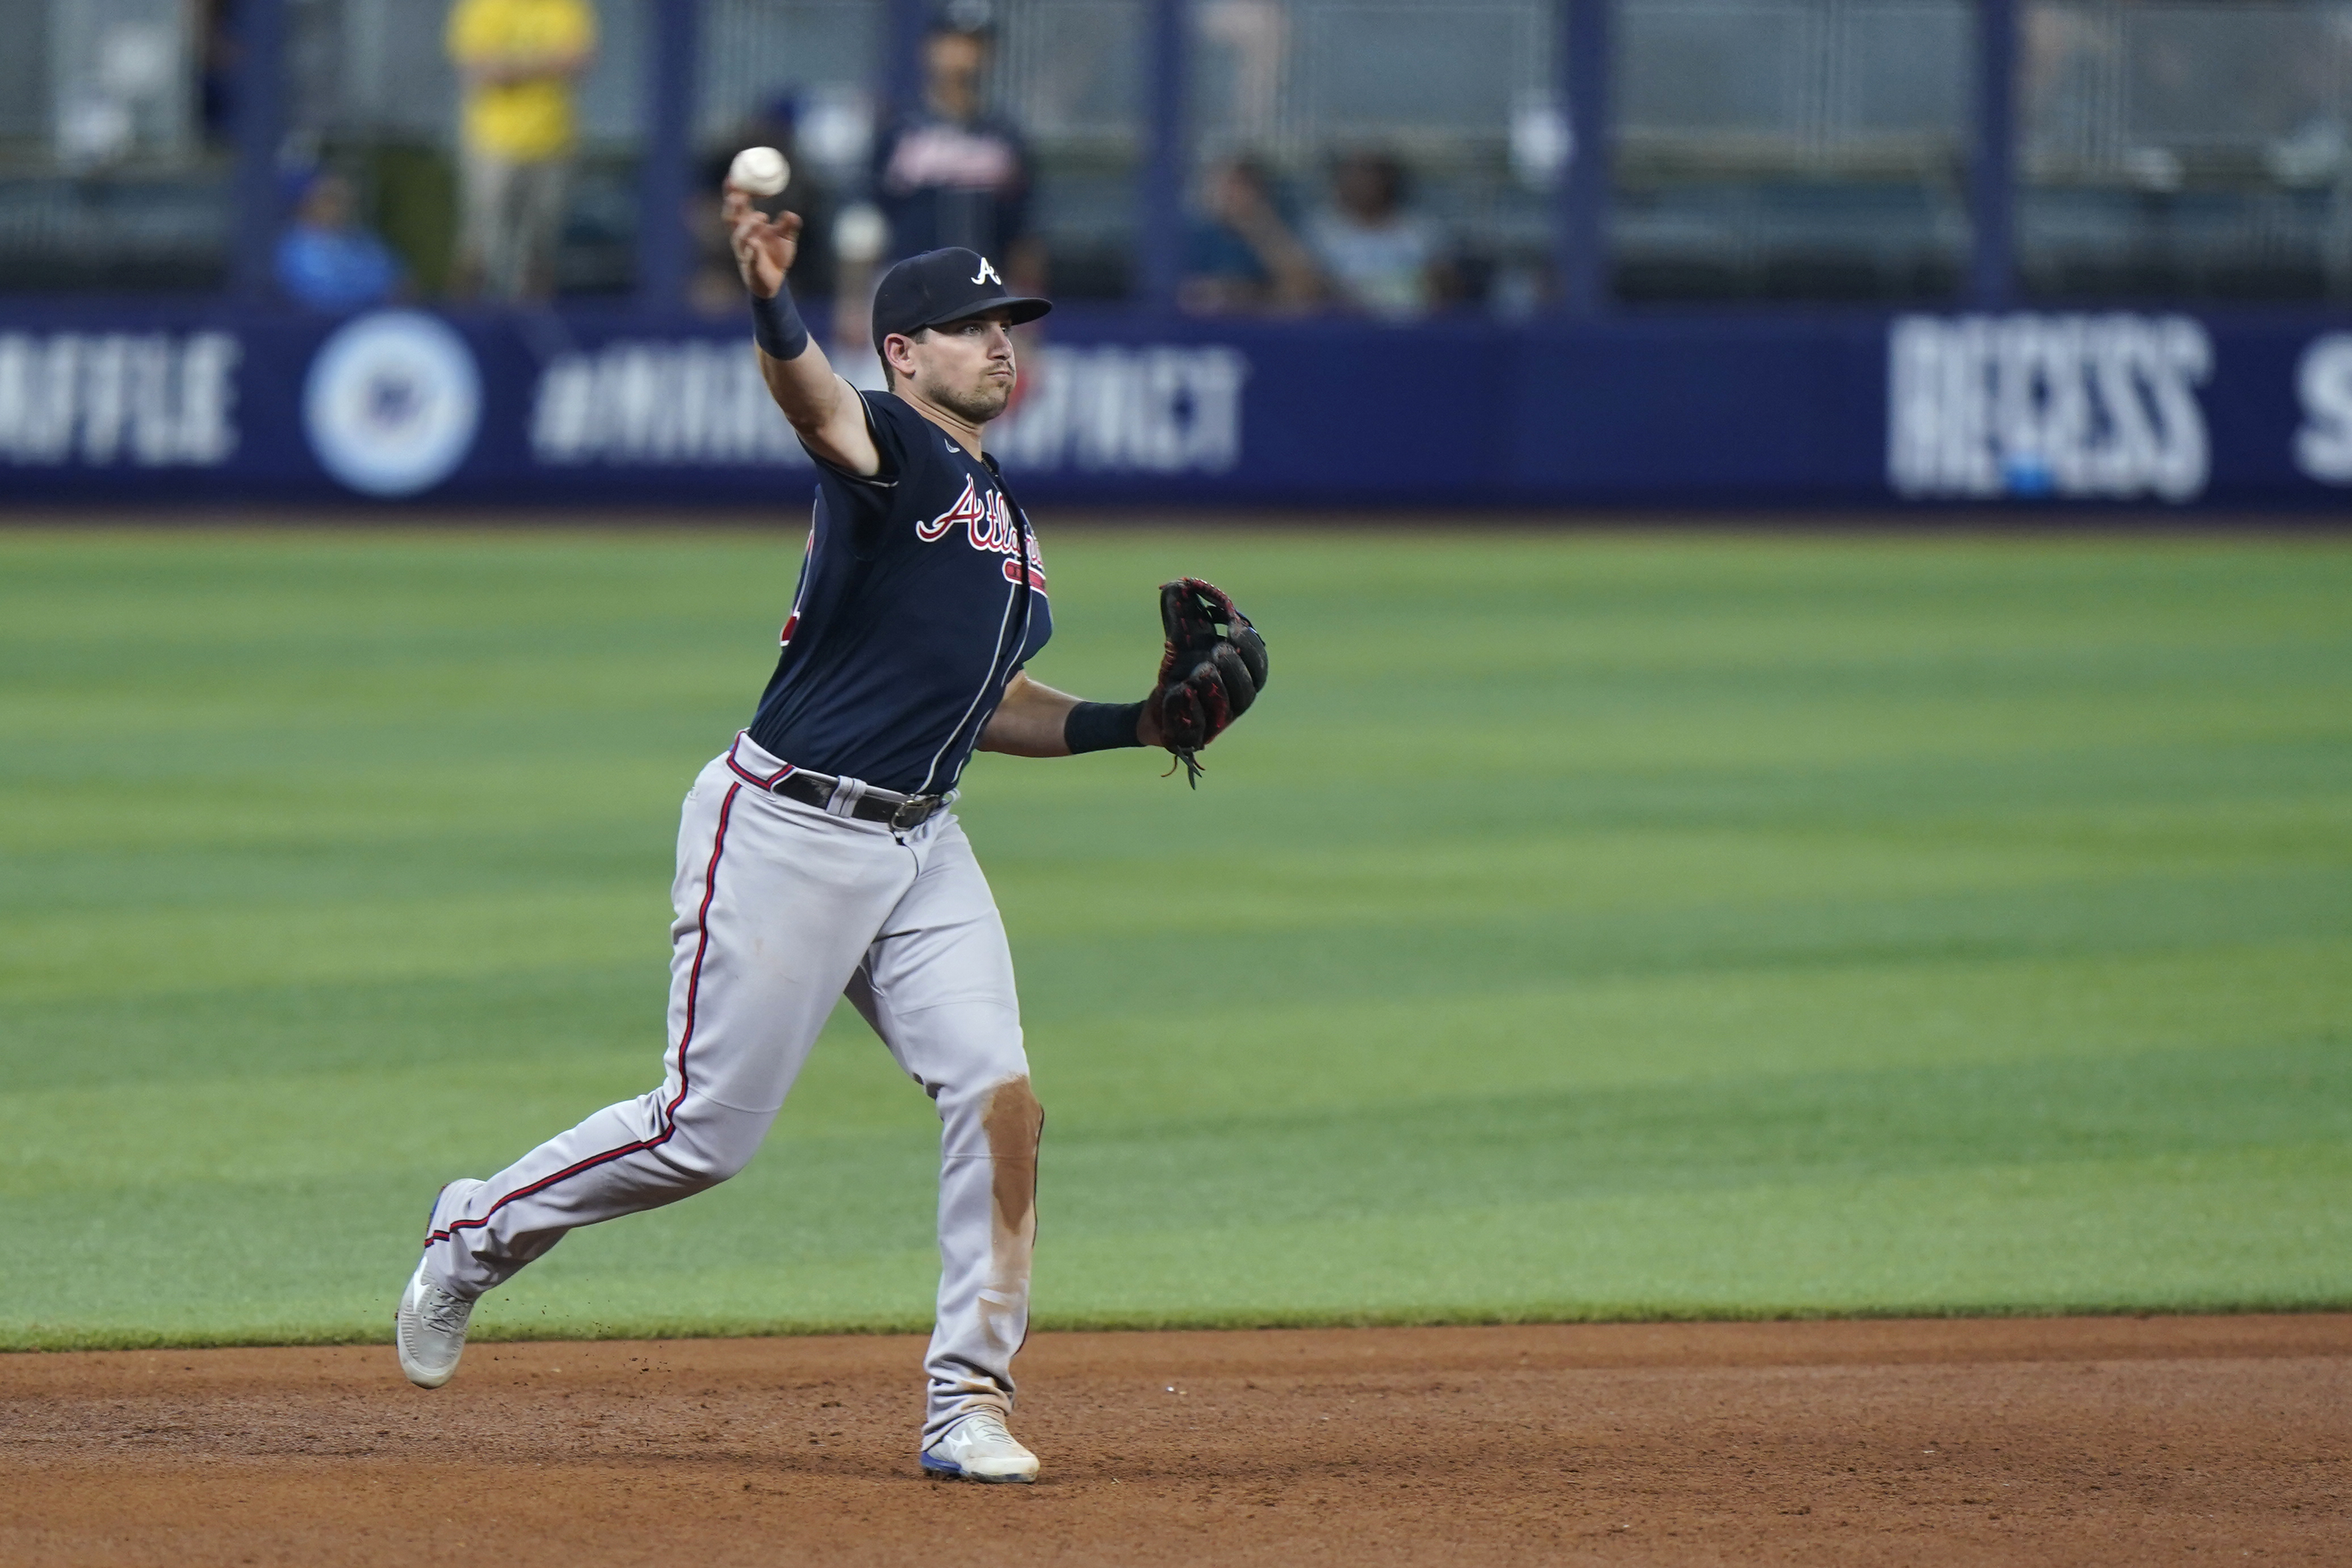 Braves sign new 1B Olson to $168 million, 8-year contract